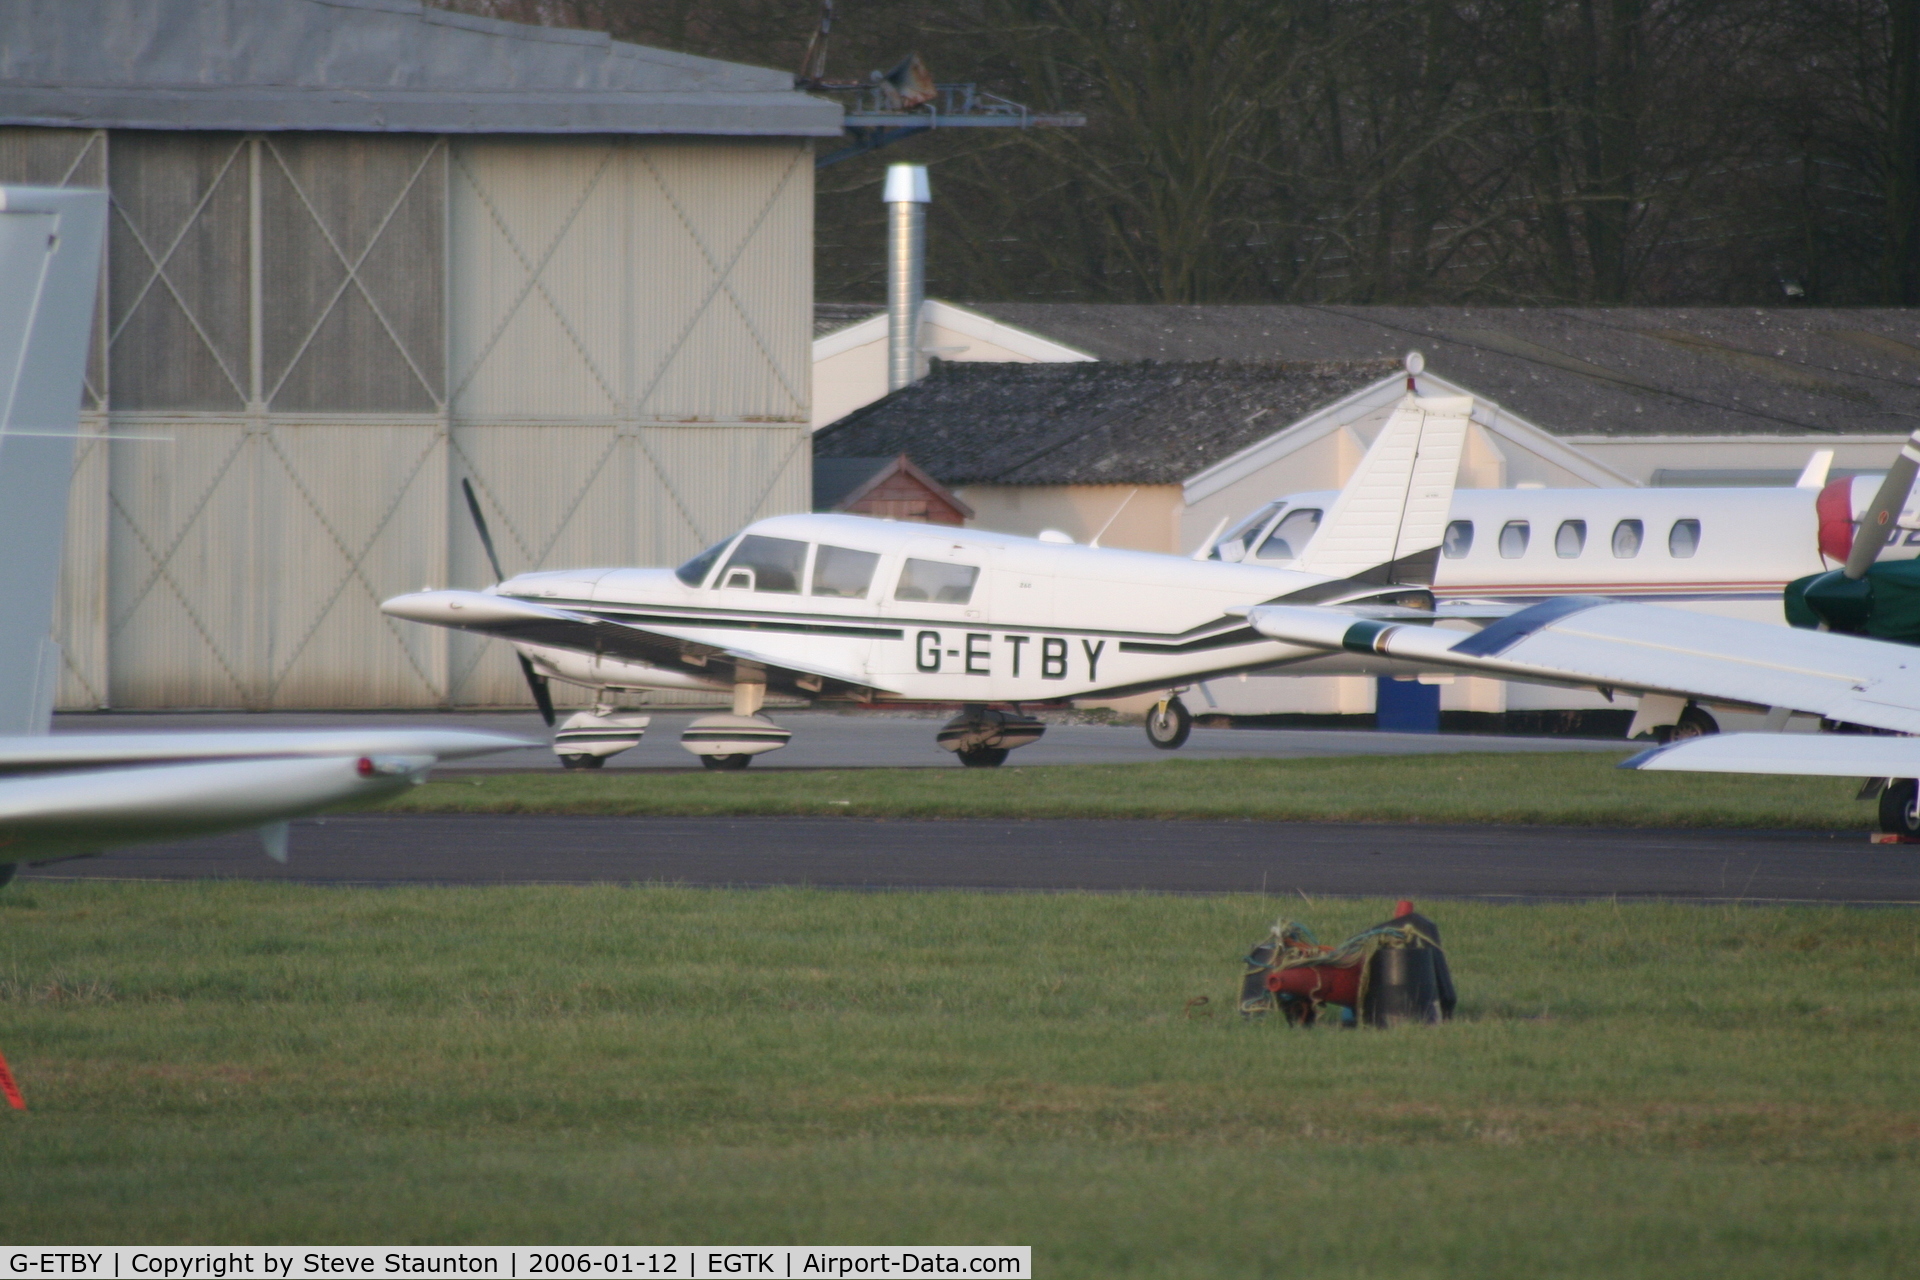 G-ETBY, 1965 Piper PA-32-260 Cherokee Six Cherokee Six C/N 32-211, Taken on a winters day at Kidlington, Oxford